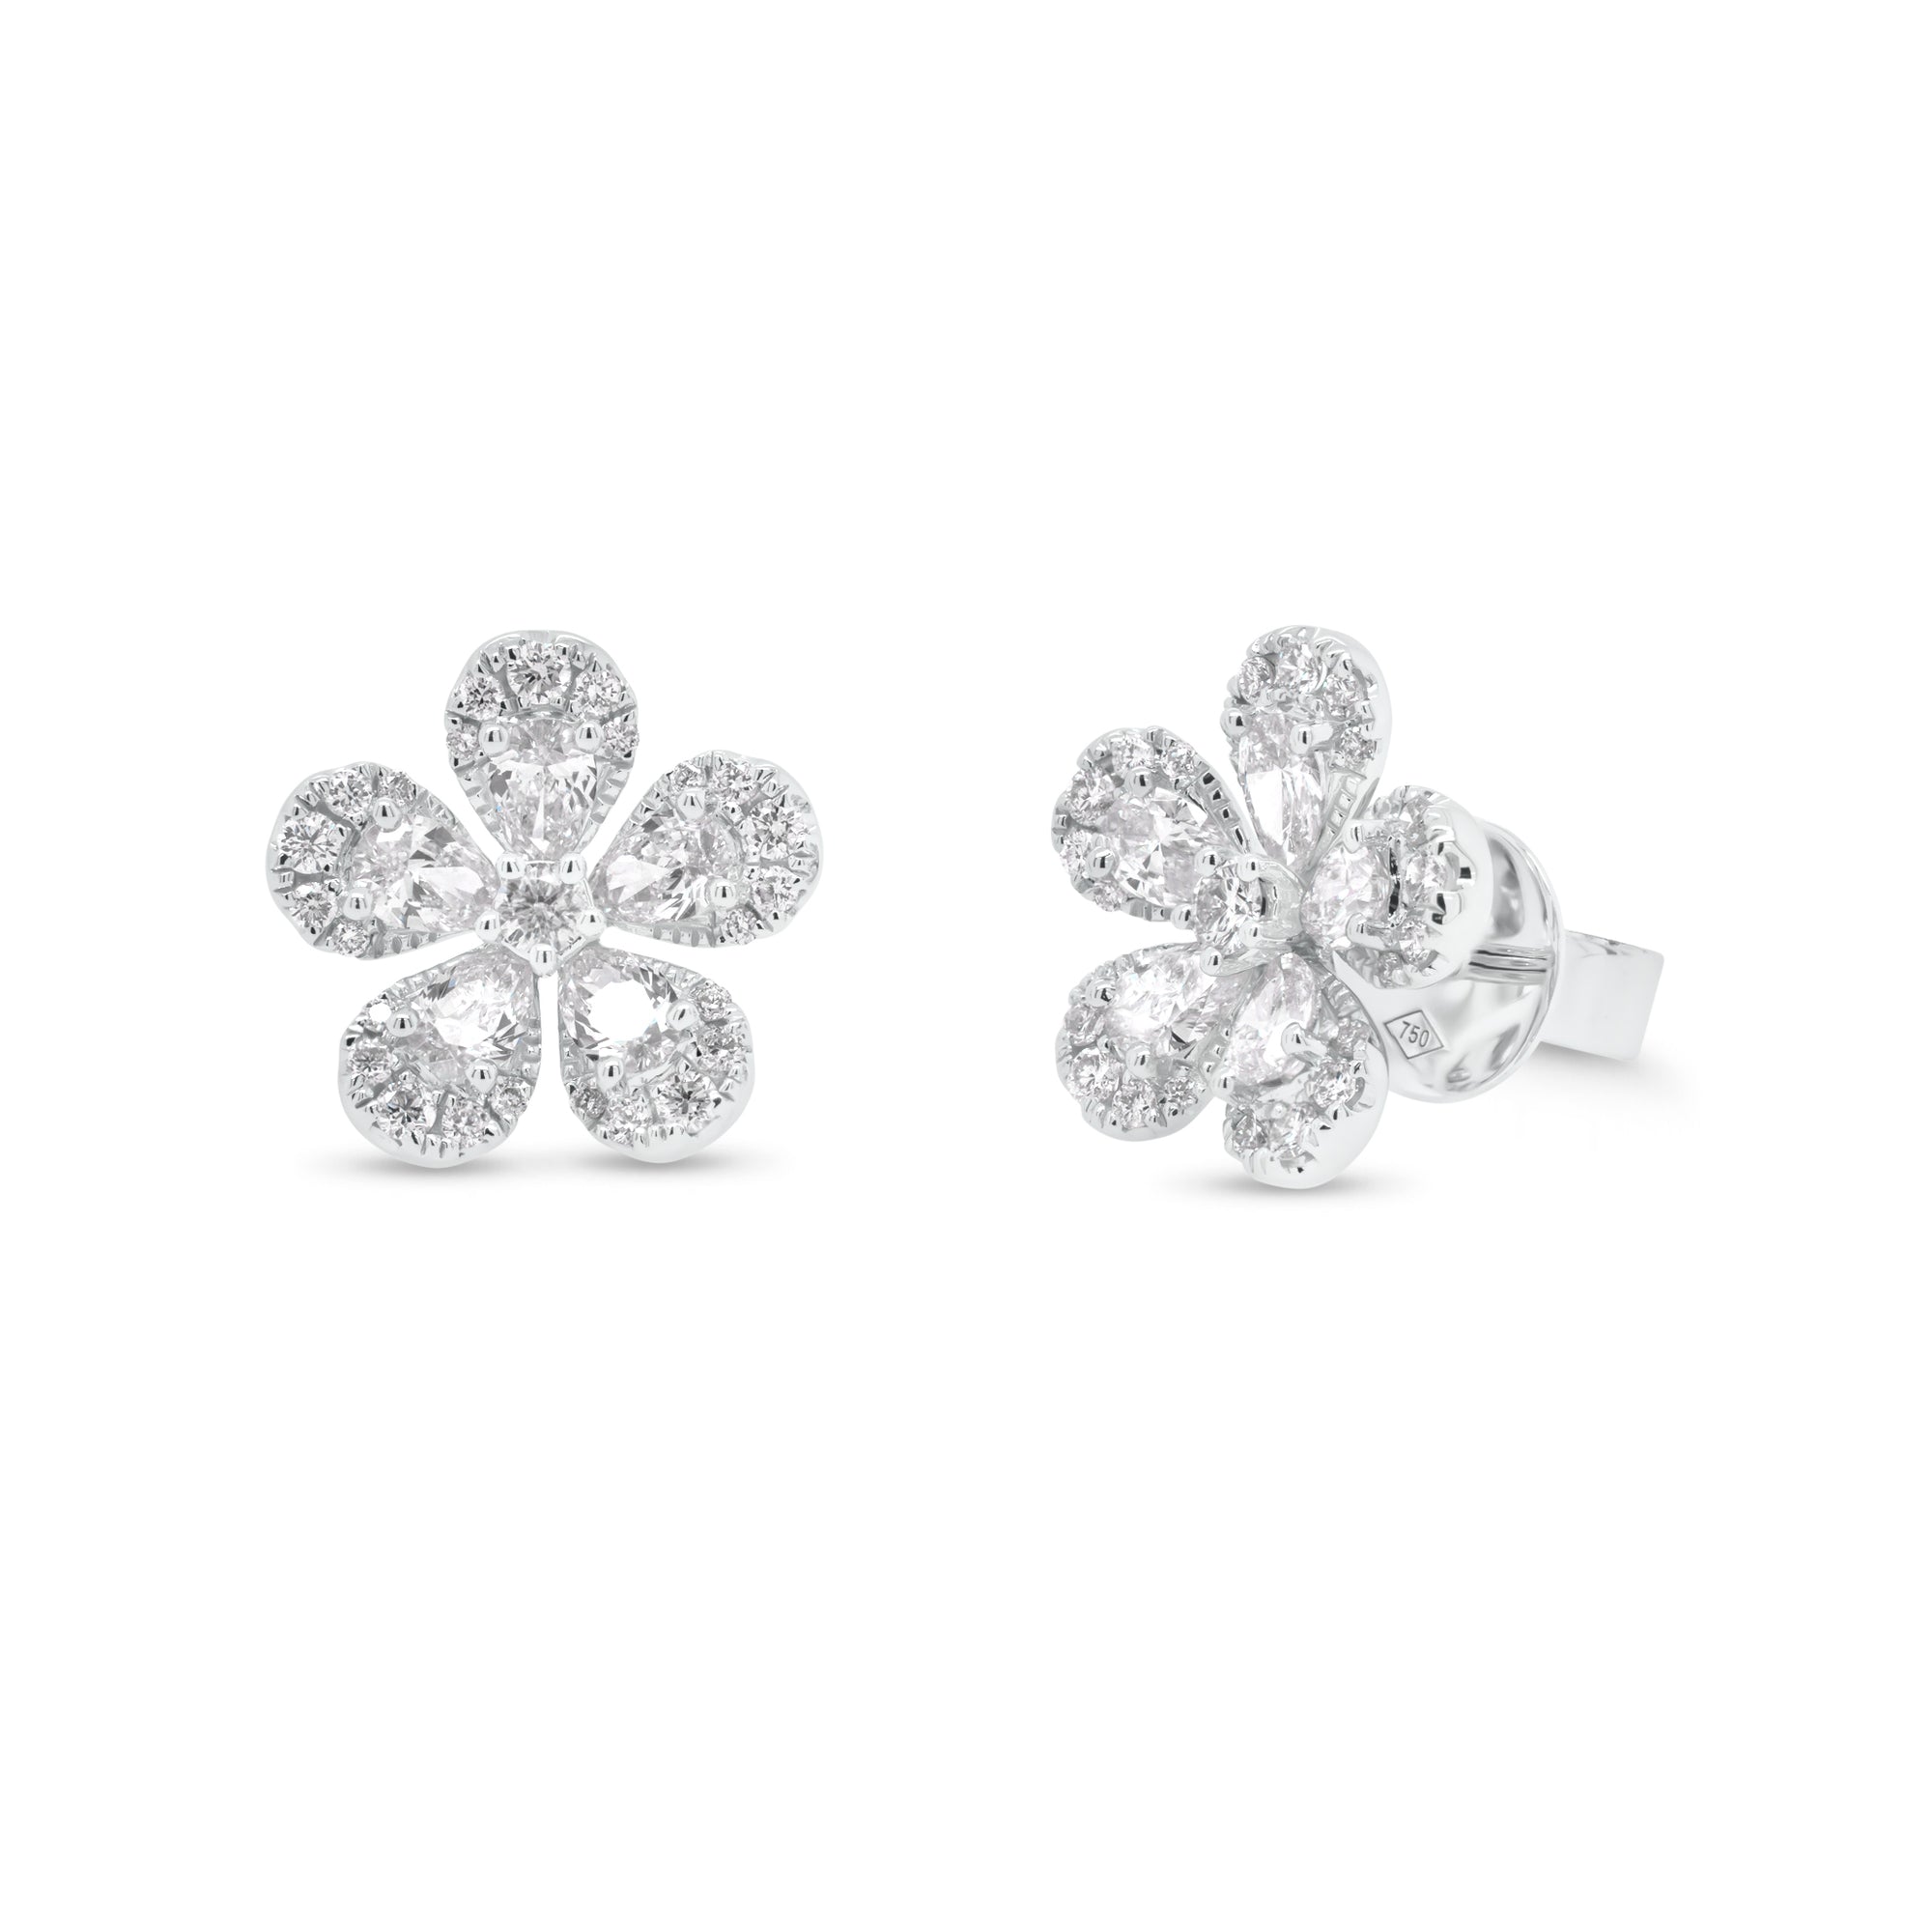 Pear-Shaped Diamond Daisy Stud Earrings - 18K gold weighing 3.64 grams  - 10 pear-shaped diamonds weighing 1.10 carats  - 2 round diamonds weighing 0.13 carats  - 50 round diamonds weighing 0.24 carats